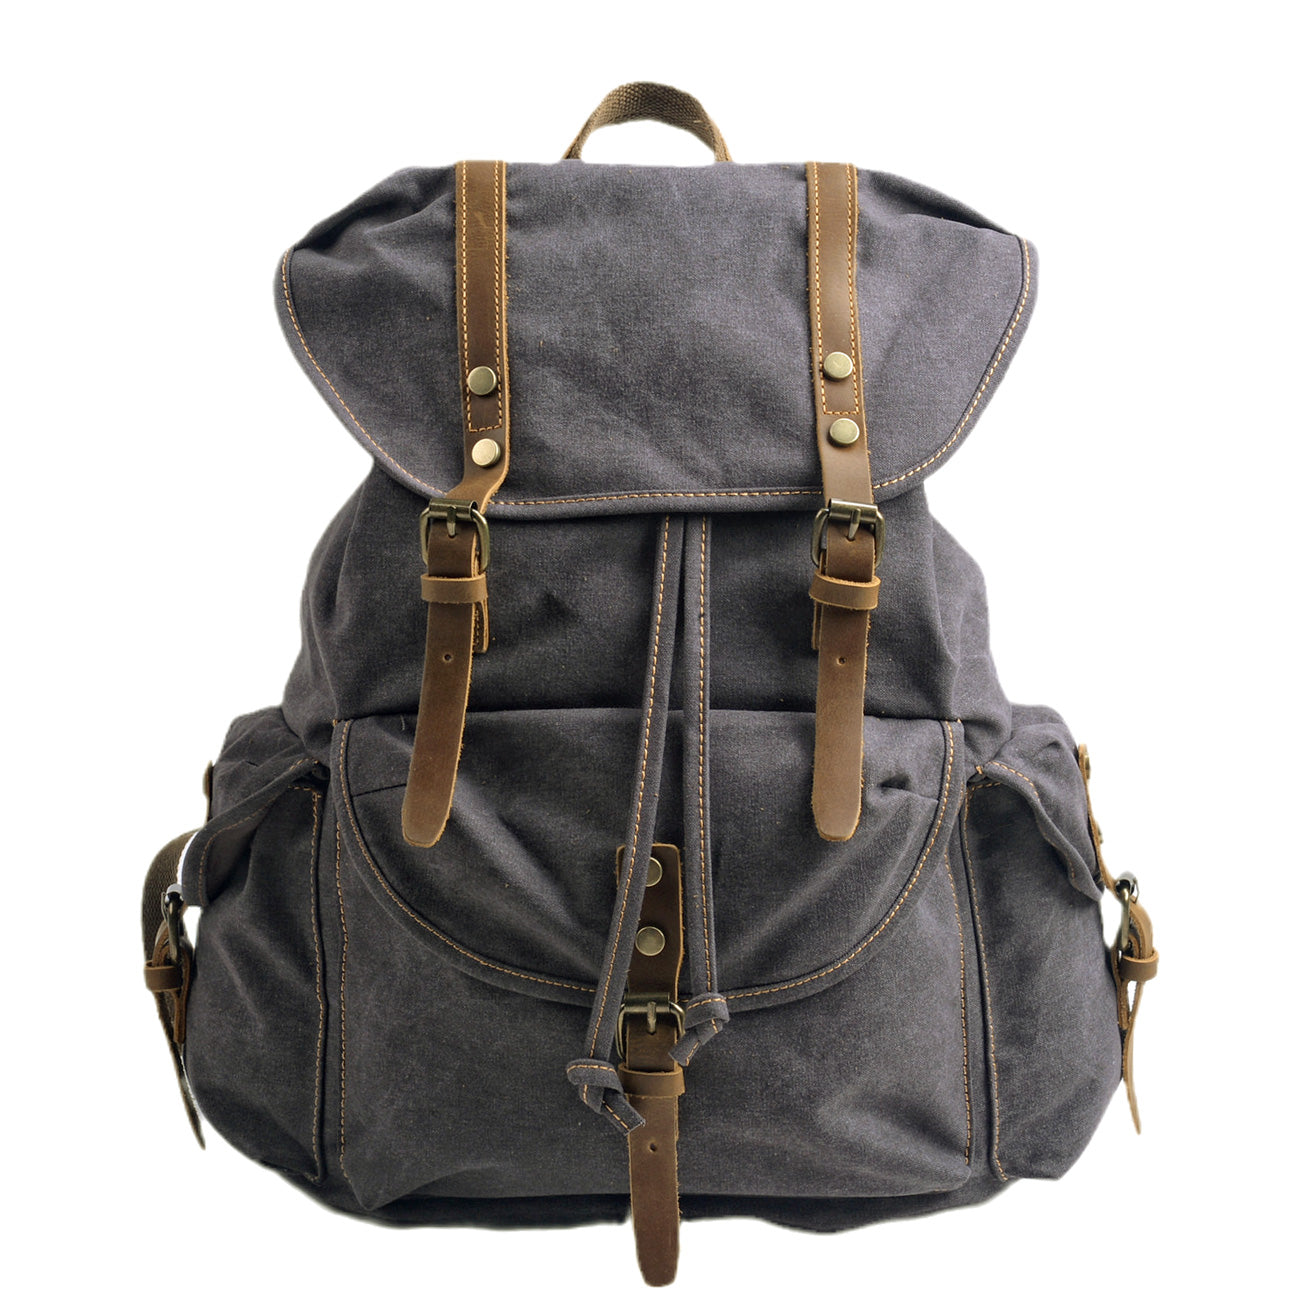 Military Canvas Backpack - Vintage Army Backpack